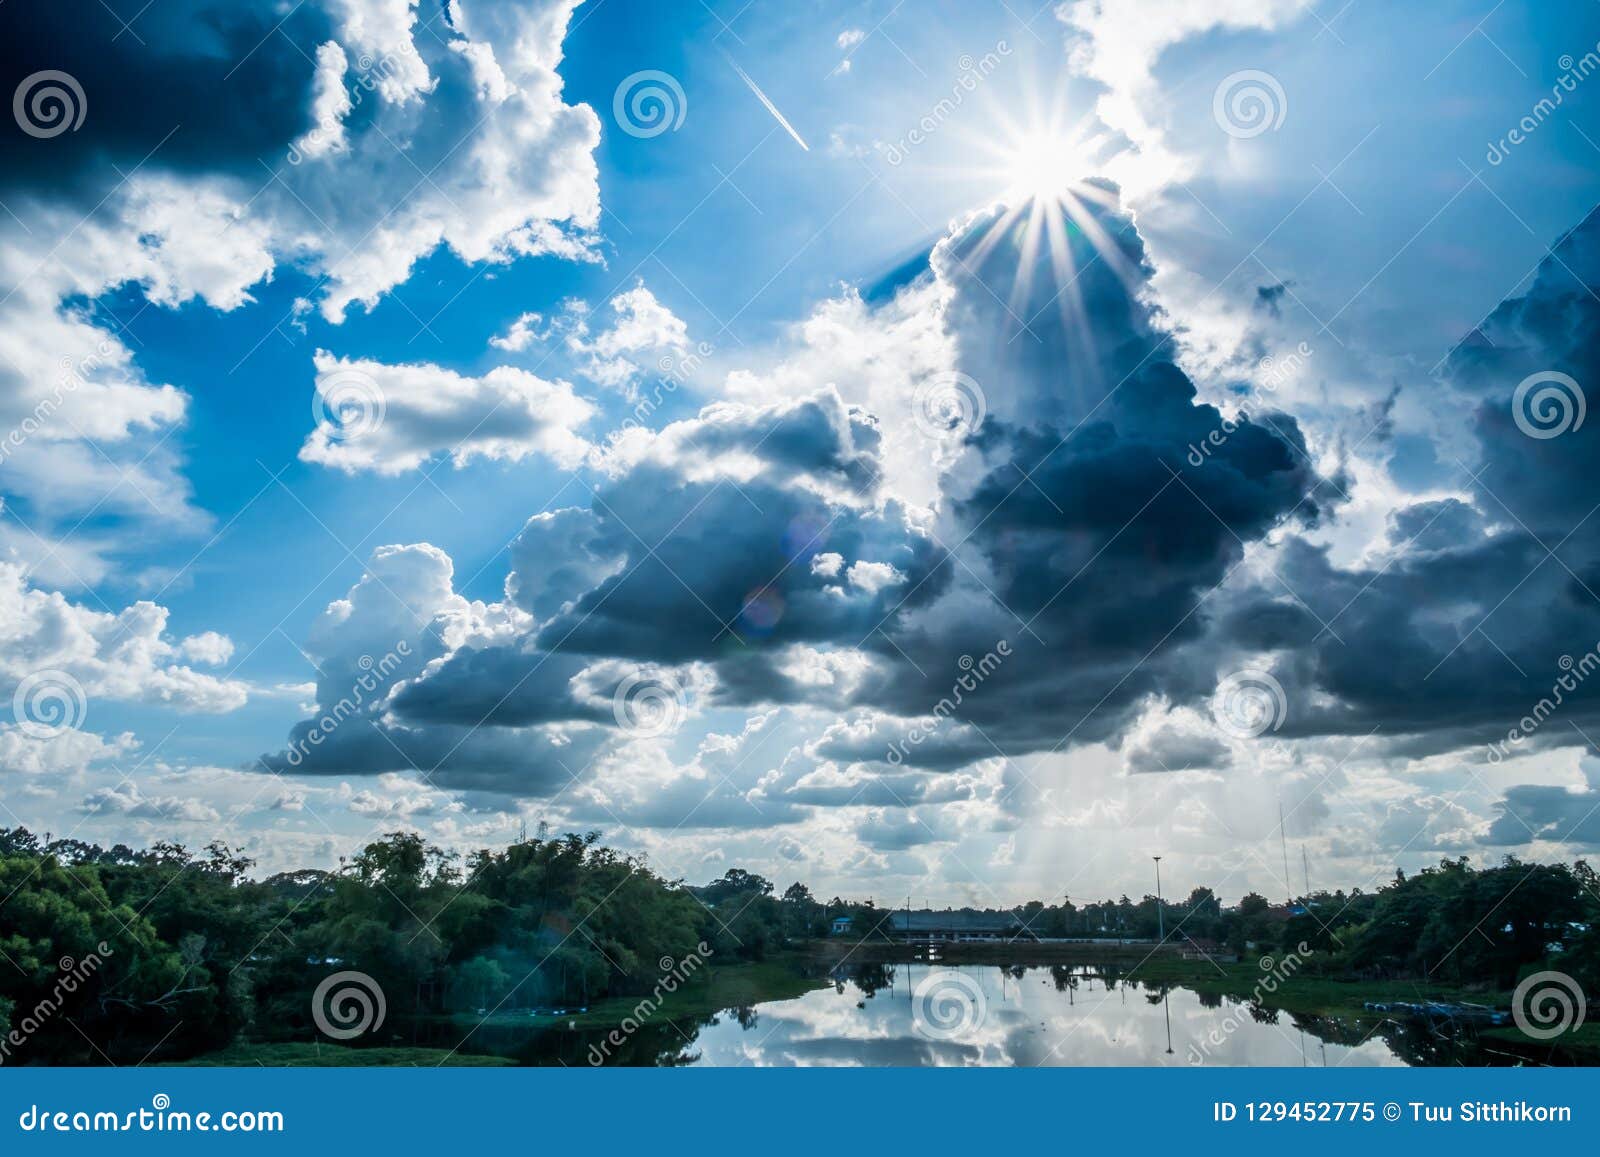 Landscape River with Rain Clouds,beautiful Scenery,Moon River Th ...